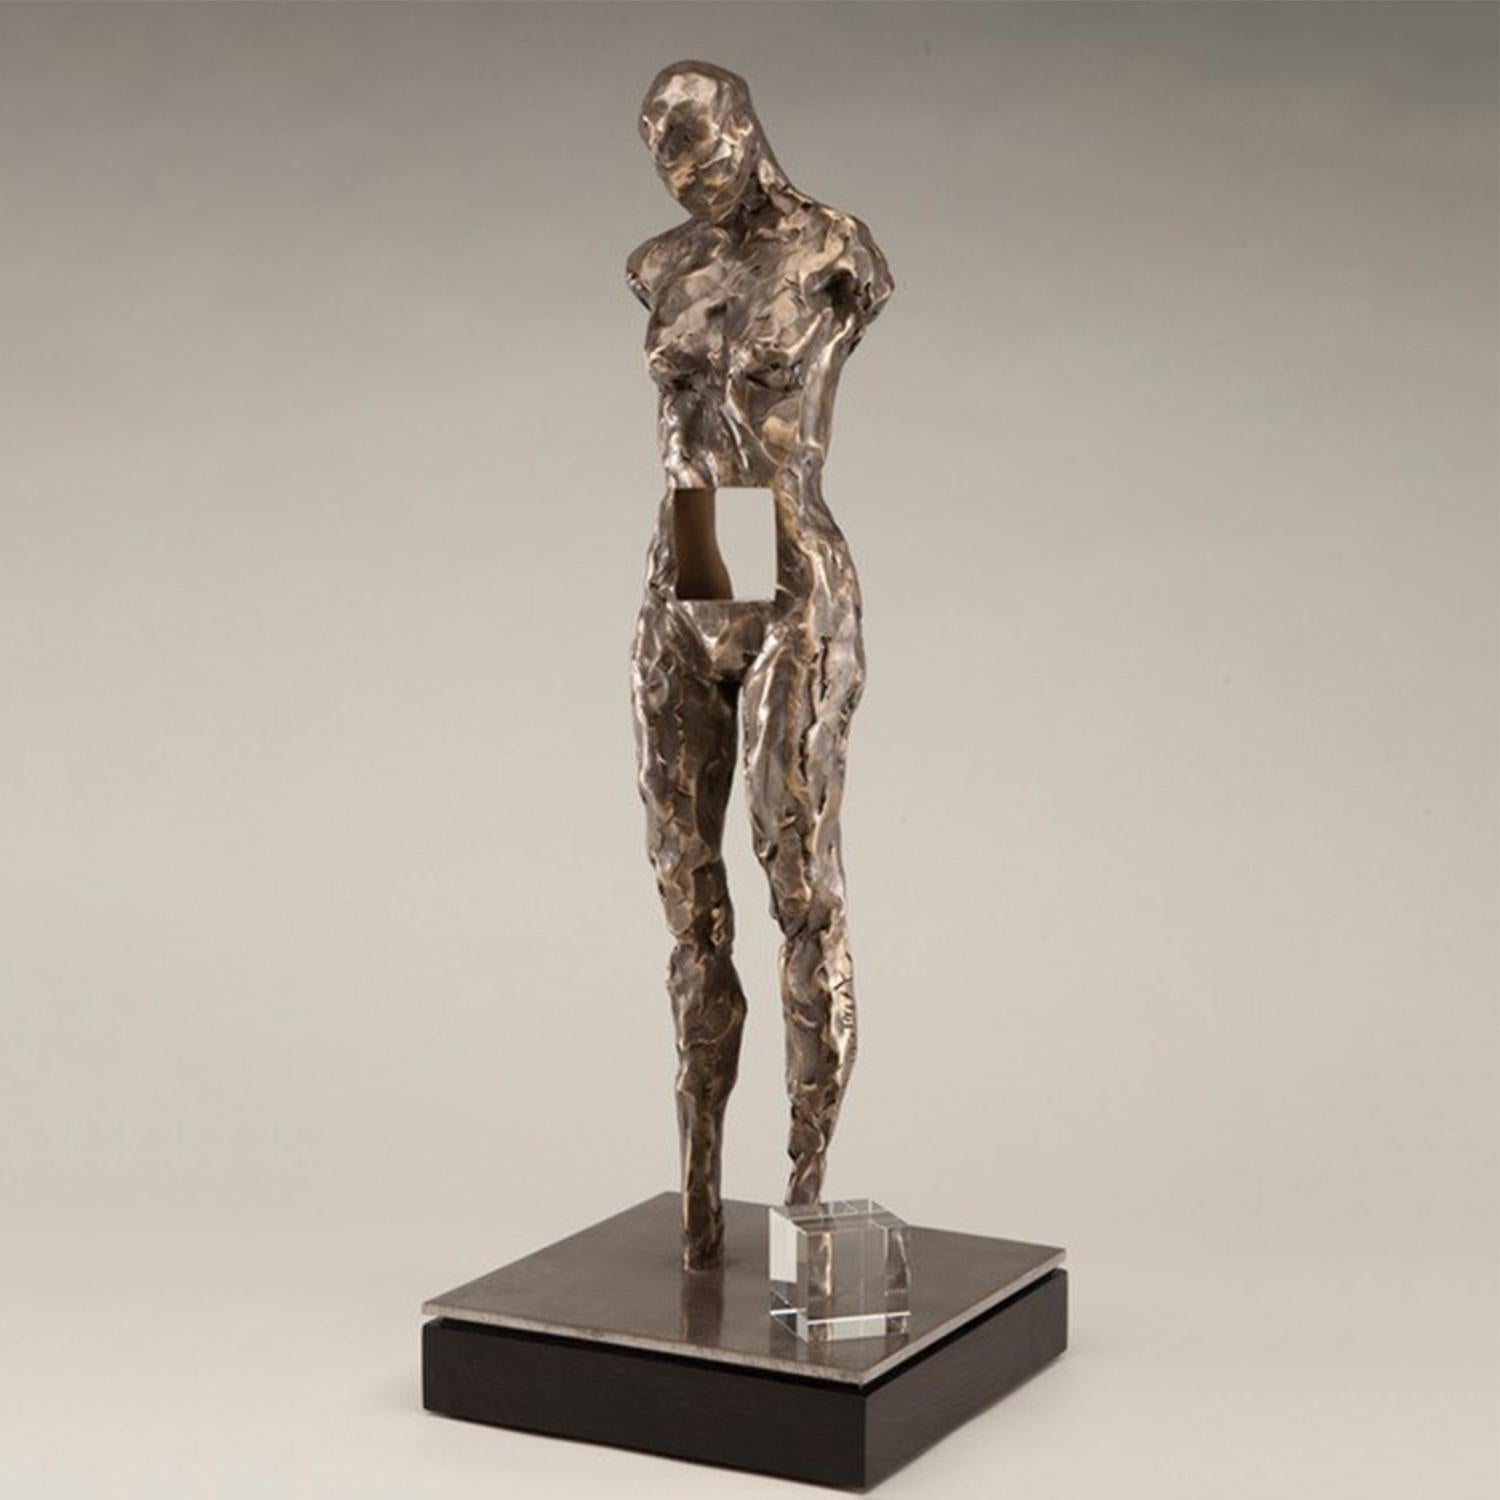 Part of Me - Female 3/9 - Sculpture by Gail Folwell